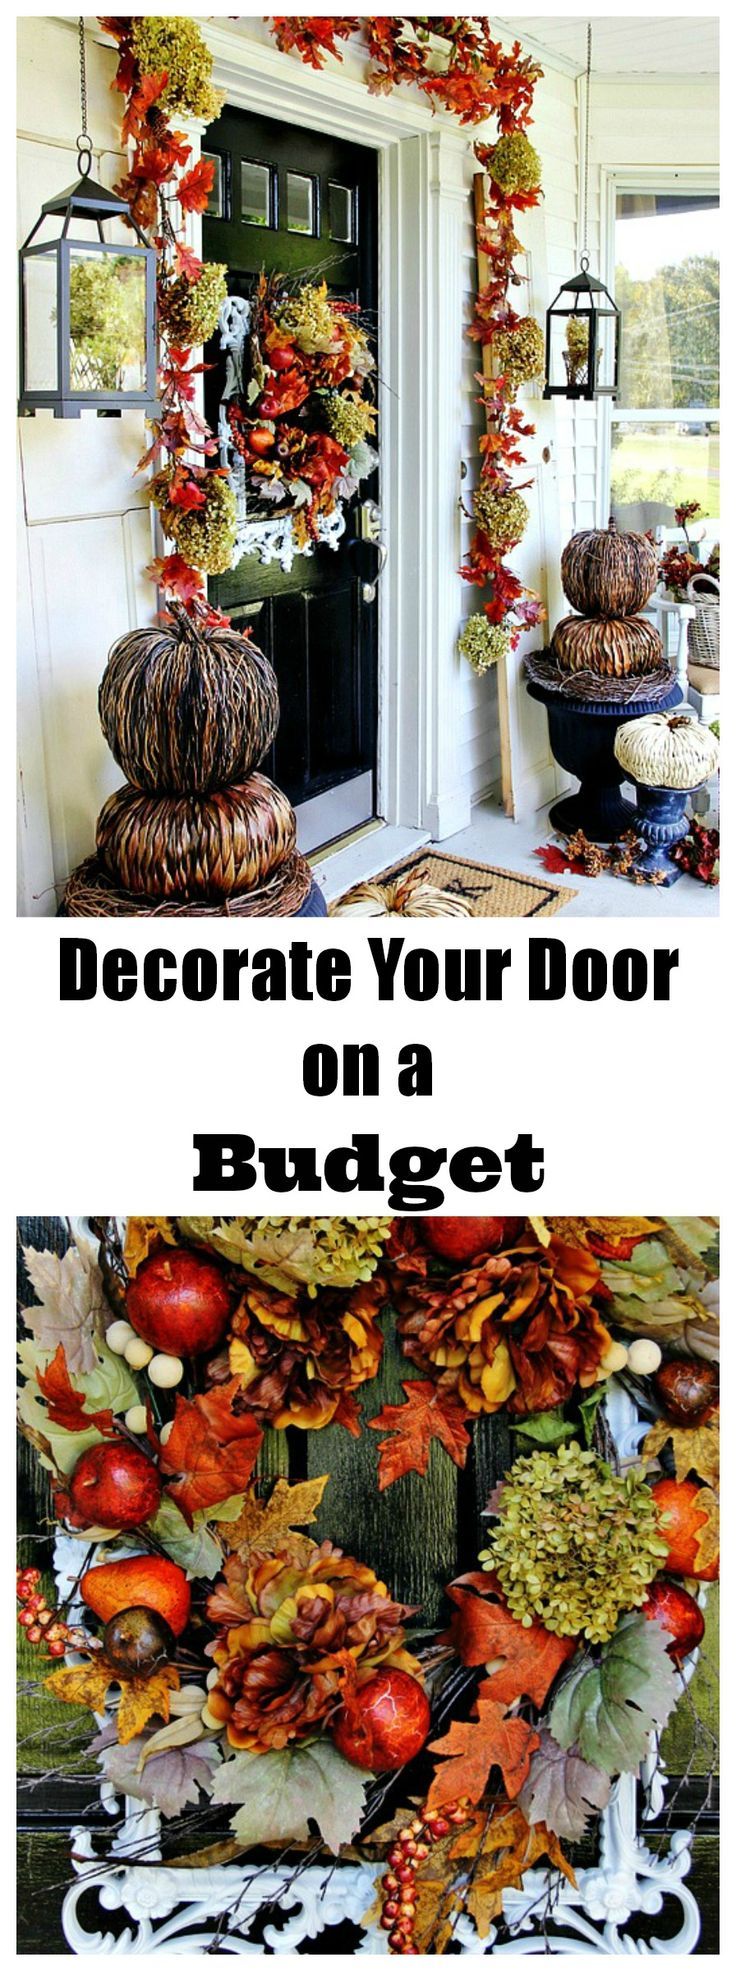 Looking for easy budget ideas for decorating the front door. Make pumpkin topiar...